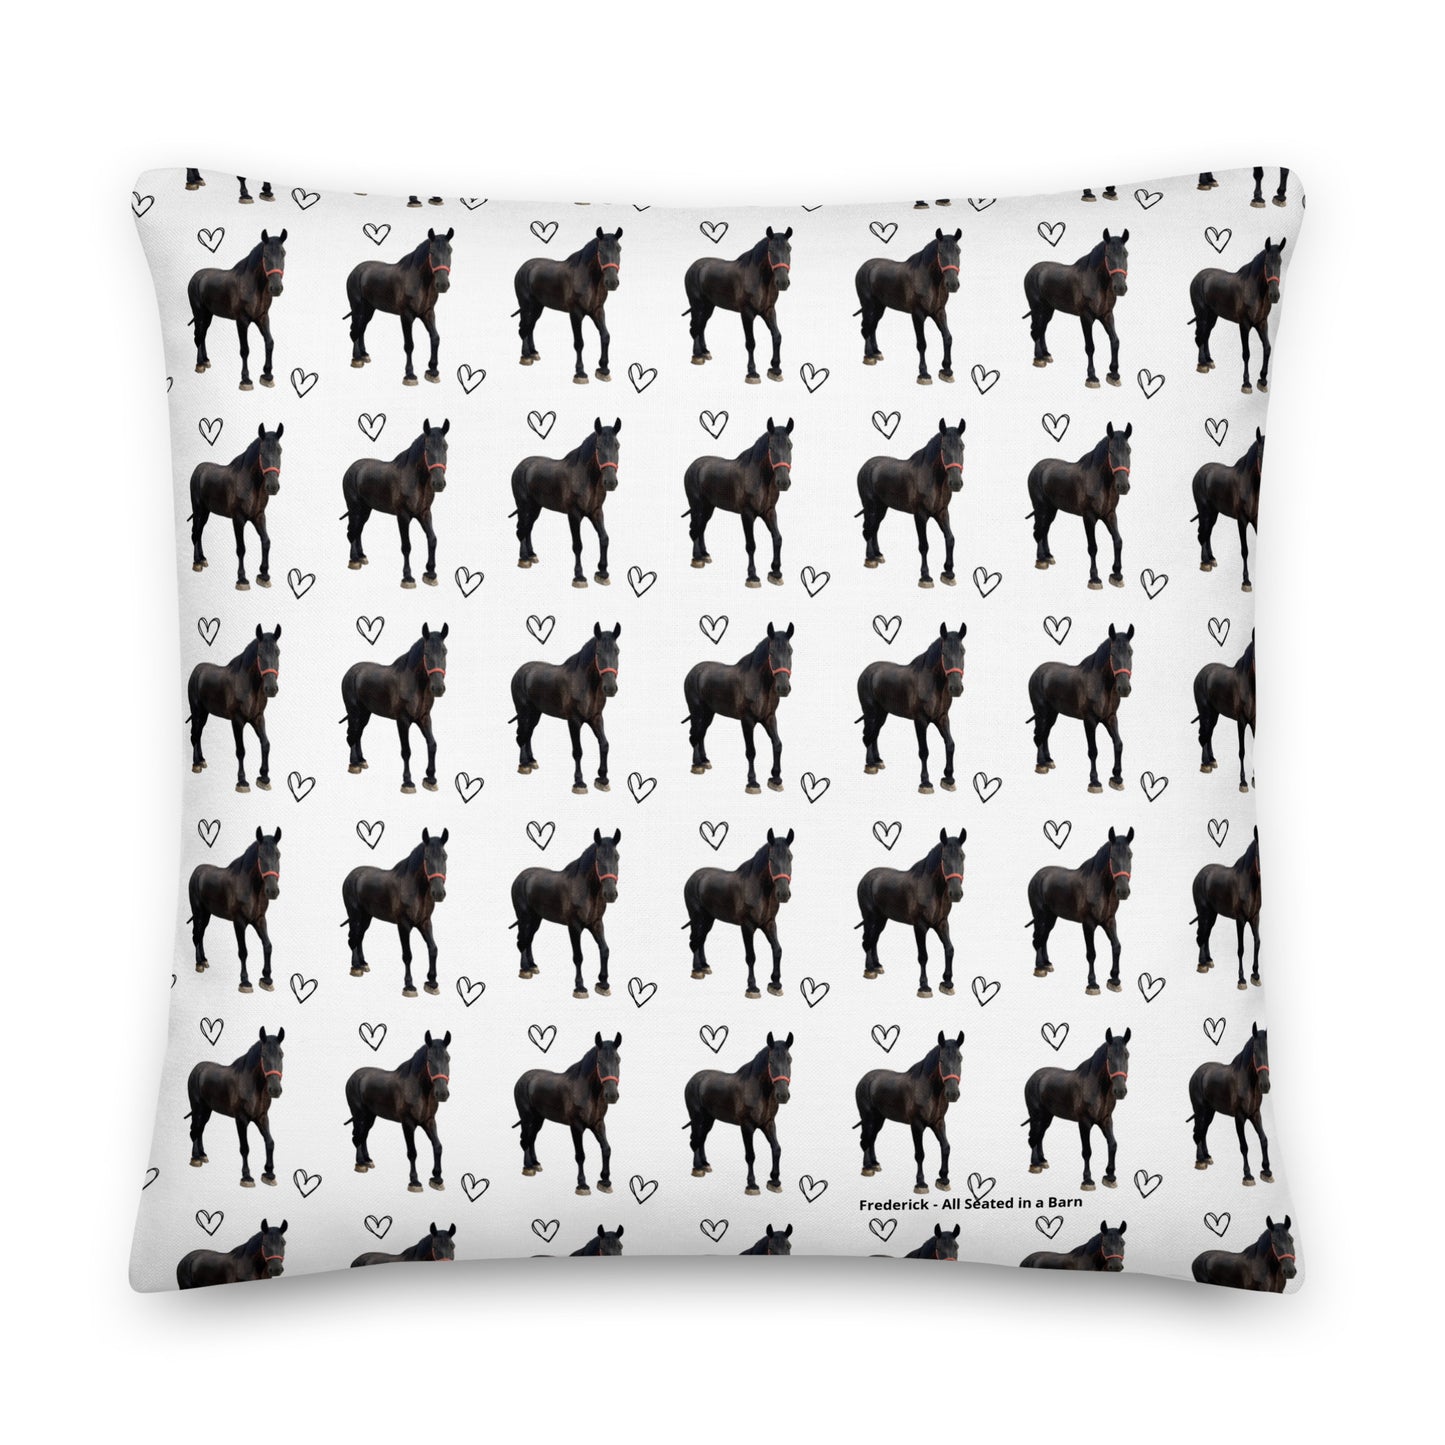 Throw Pillows - 3 Sizes - Frederick from All Seated in a Barn